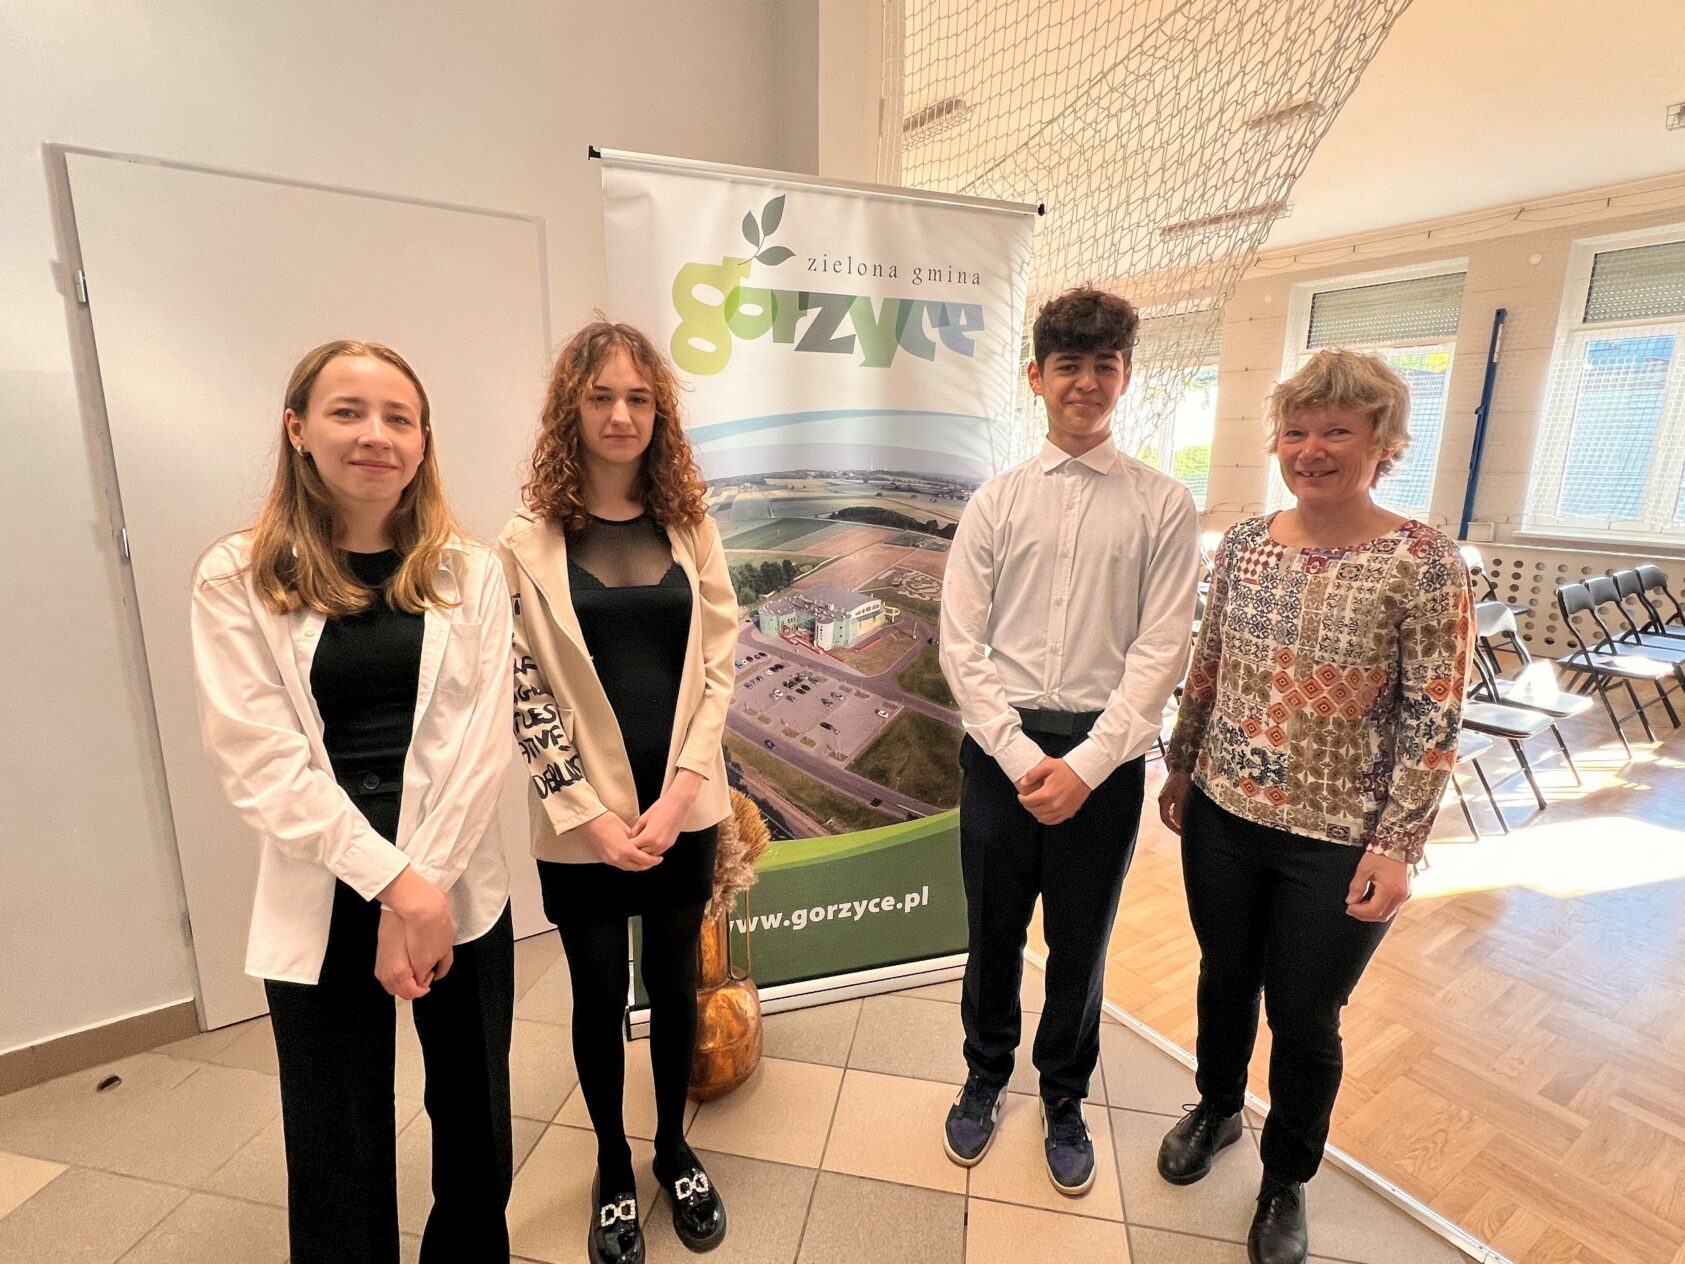 Gunn Janne Myrseth, NORCE, Eighth graders Natalia Kwiaton, Karol Adarczyk, and Magdalena Mucha, along with the four hundred other students from Zspturza School in the municipality of Gorzyce, welcomed NORCE with researcher Kirsti Midttømme., 1, , 